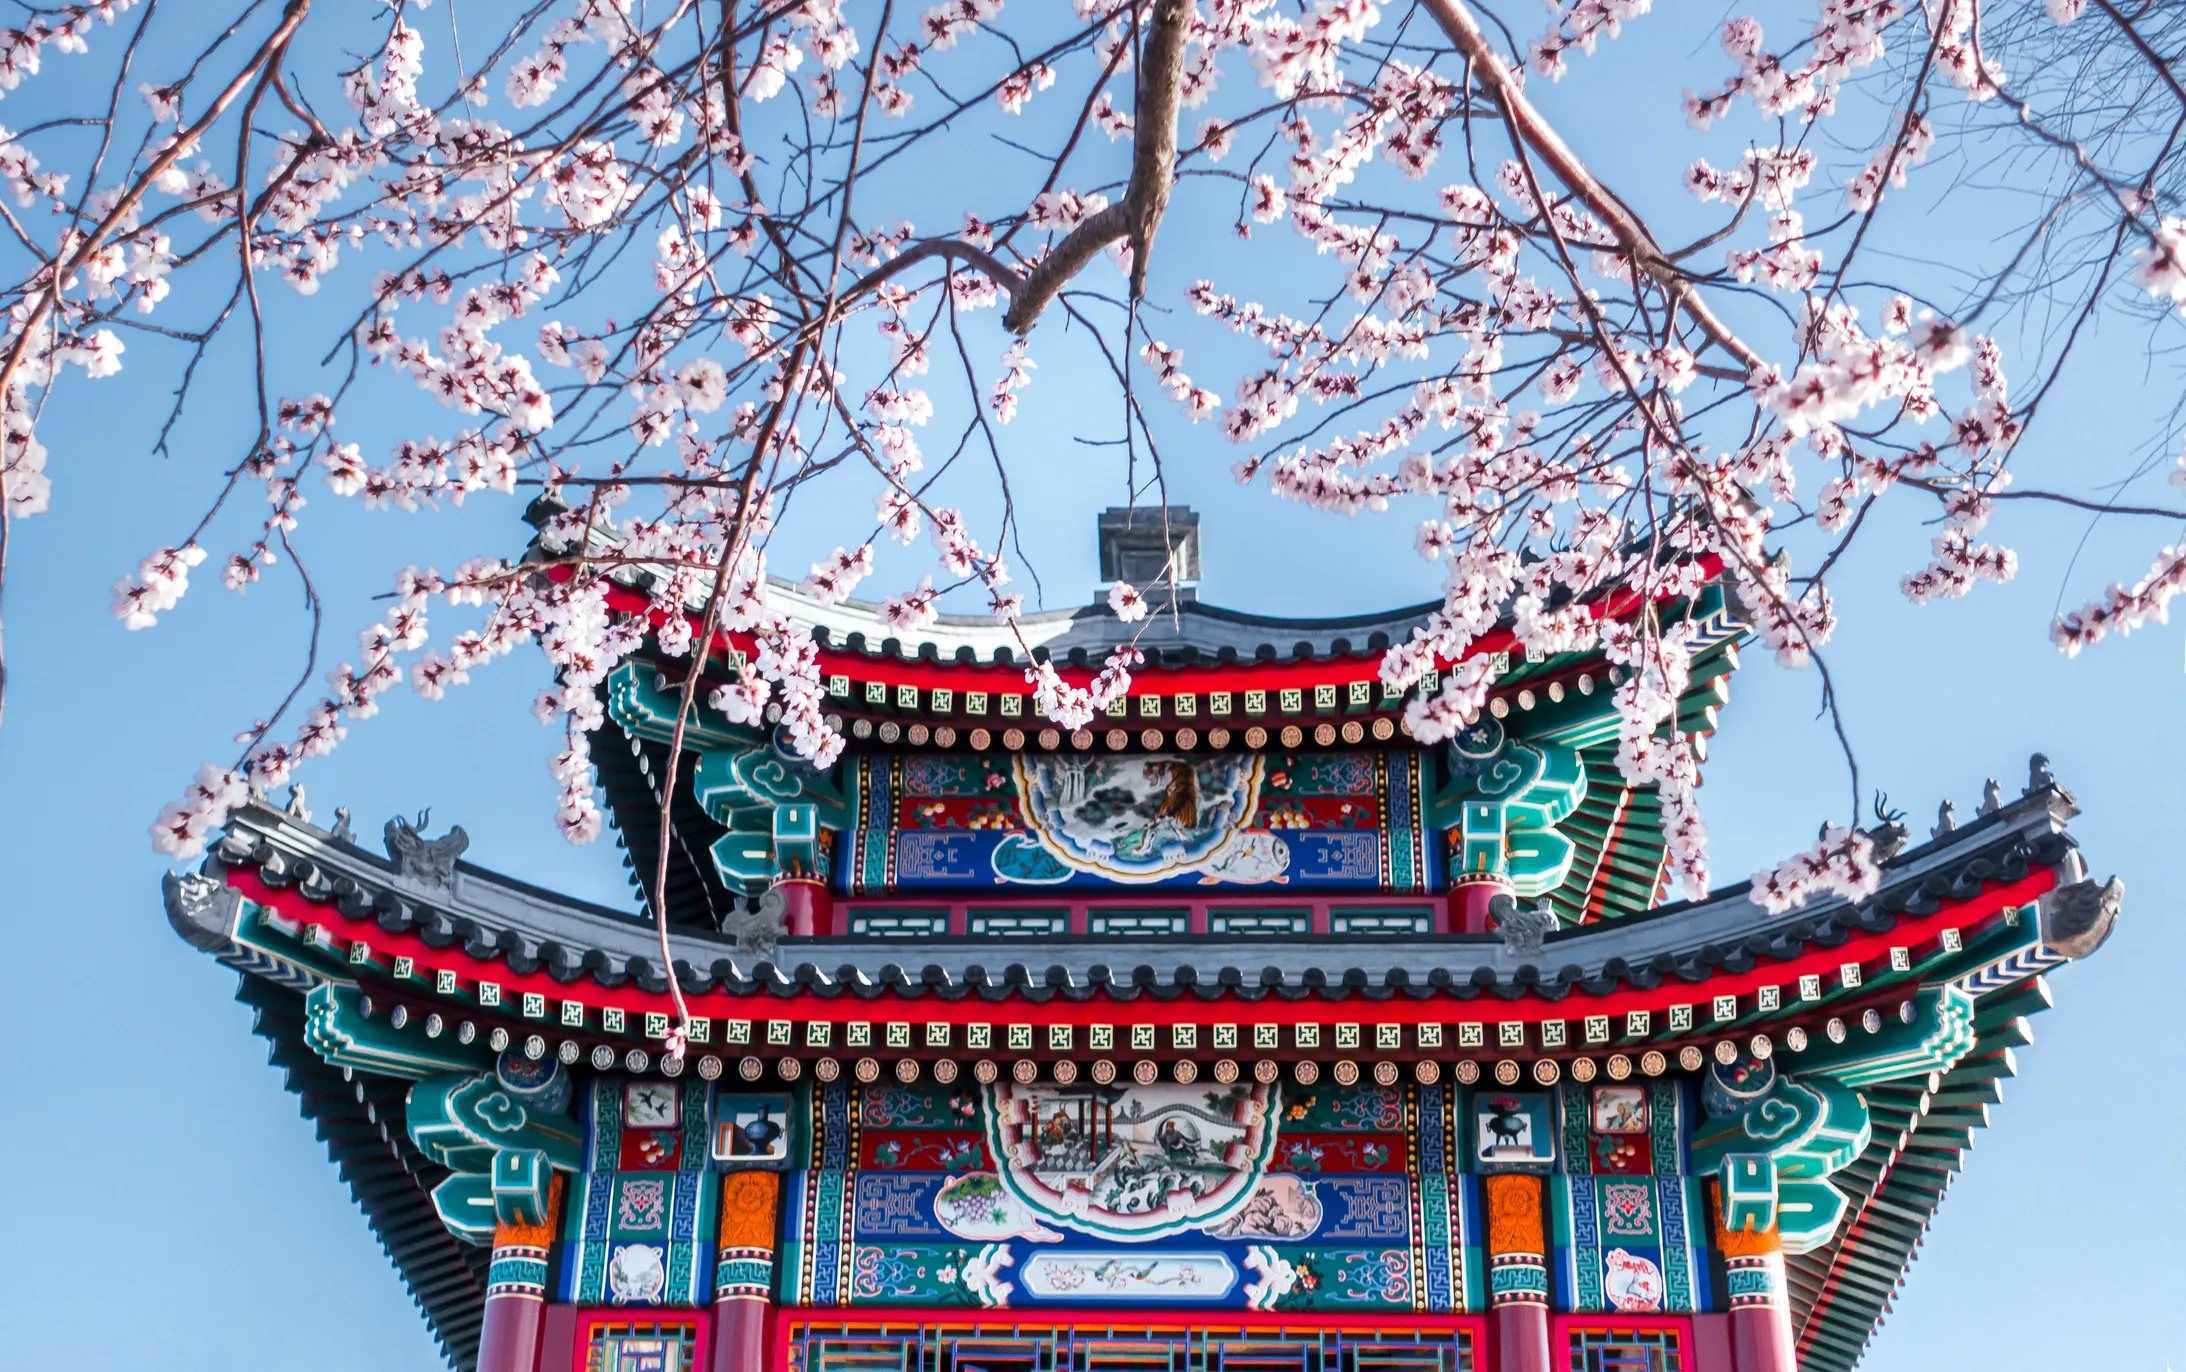 Roof of Chinese palace with cherry blossom branches in front.